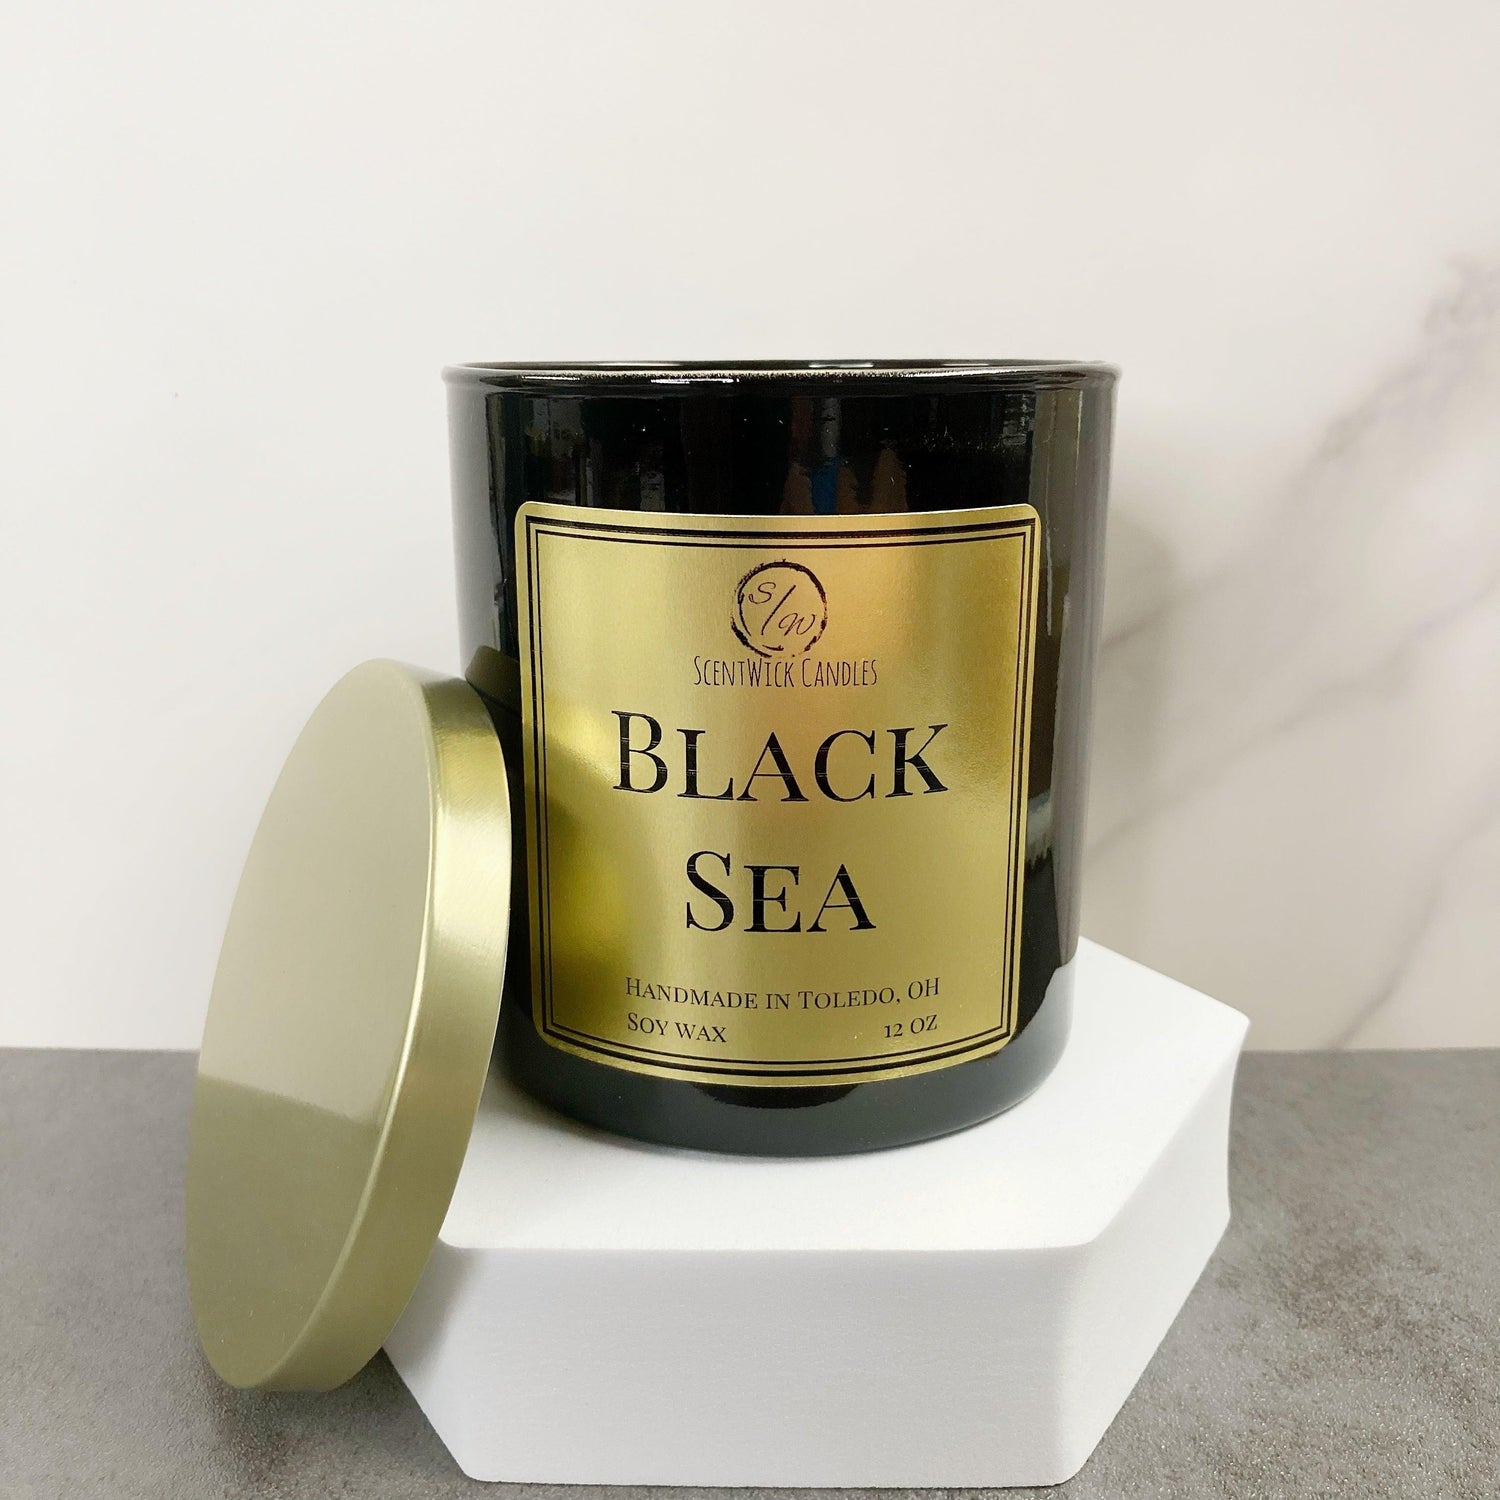 The Copper & Gold Collection - Black Sea Candle - ScentWick Candles